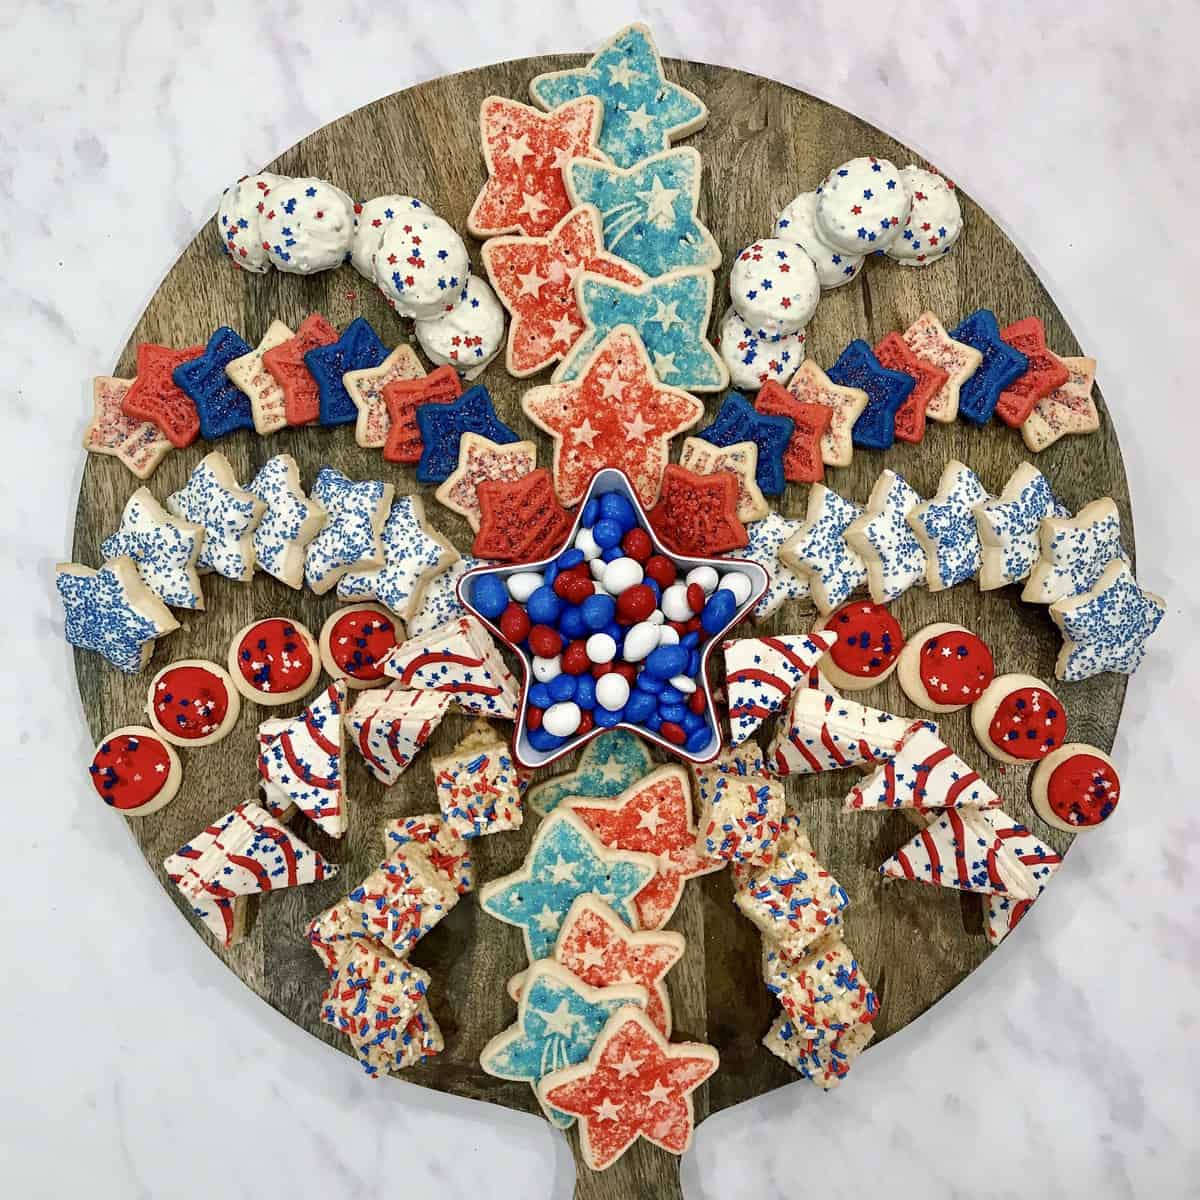 Star-Spangled Sweets Board by The BakerMama